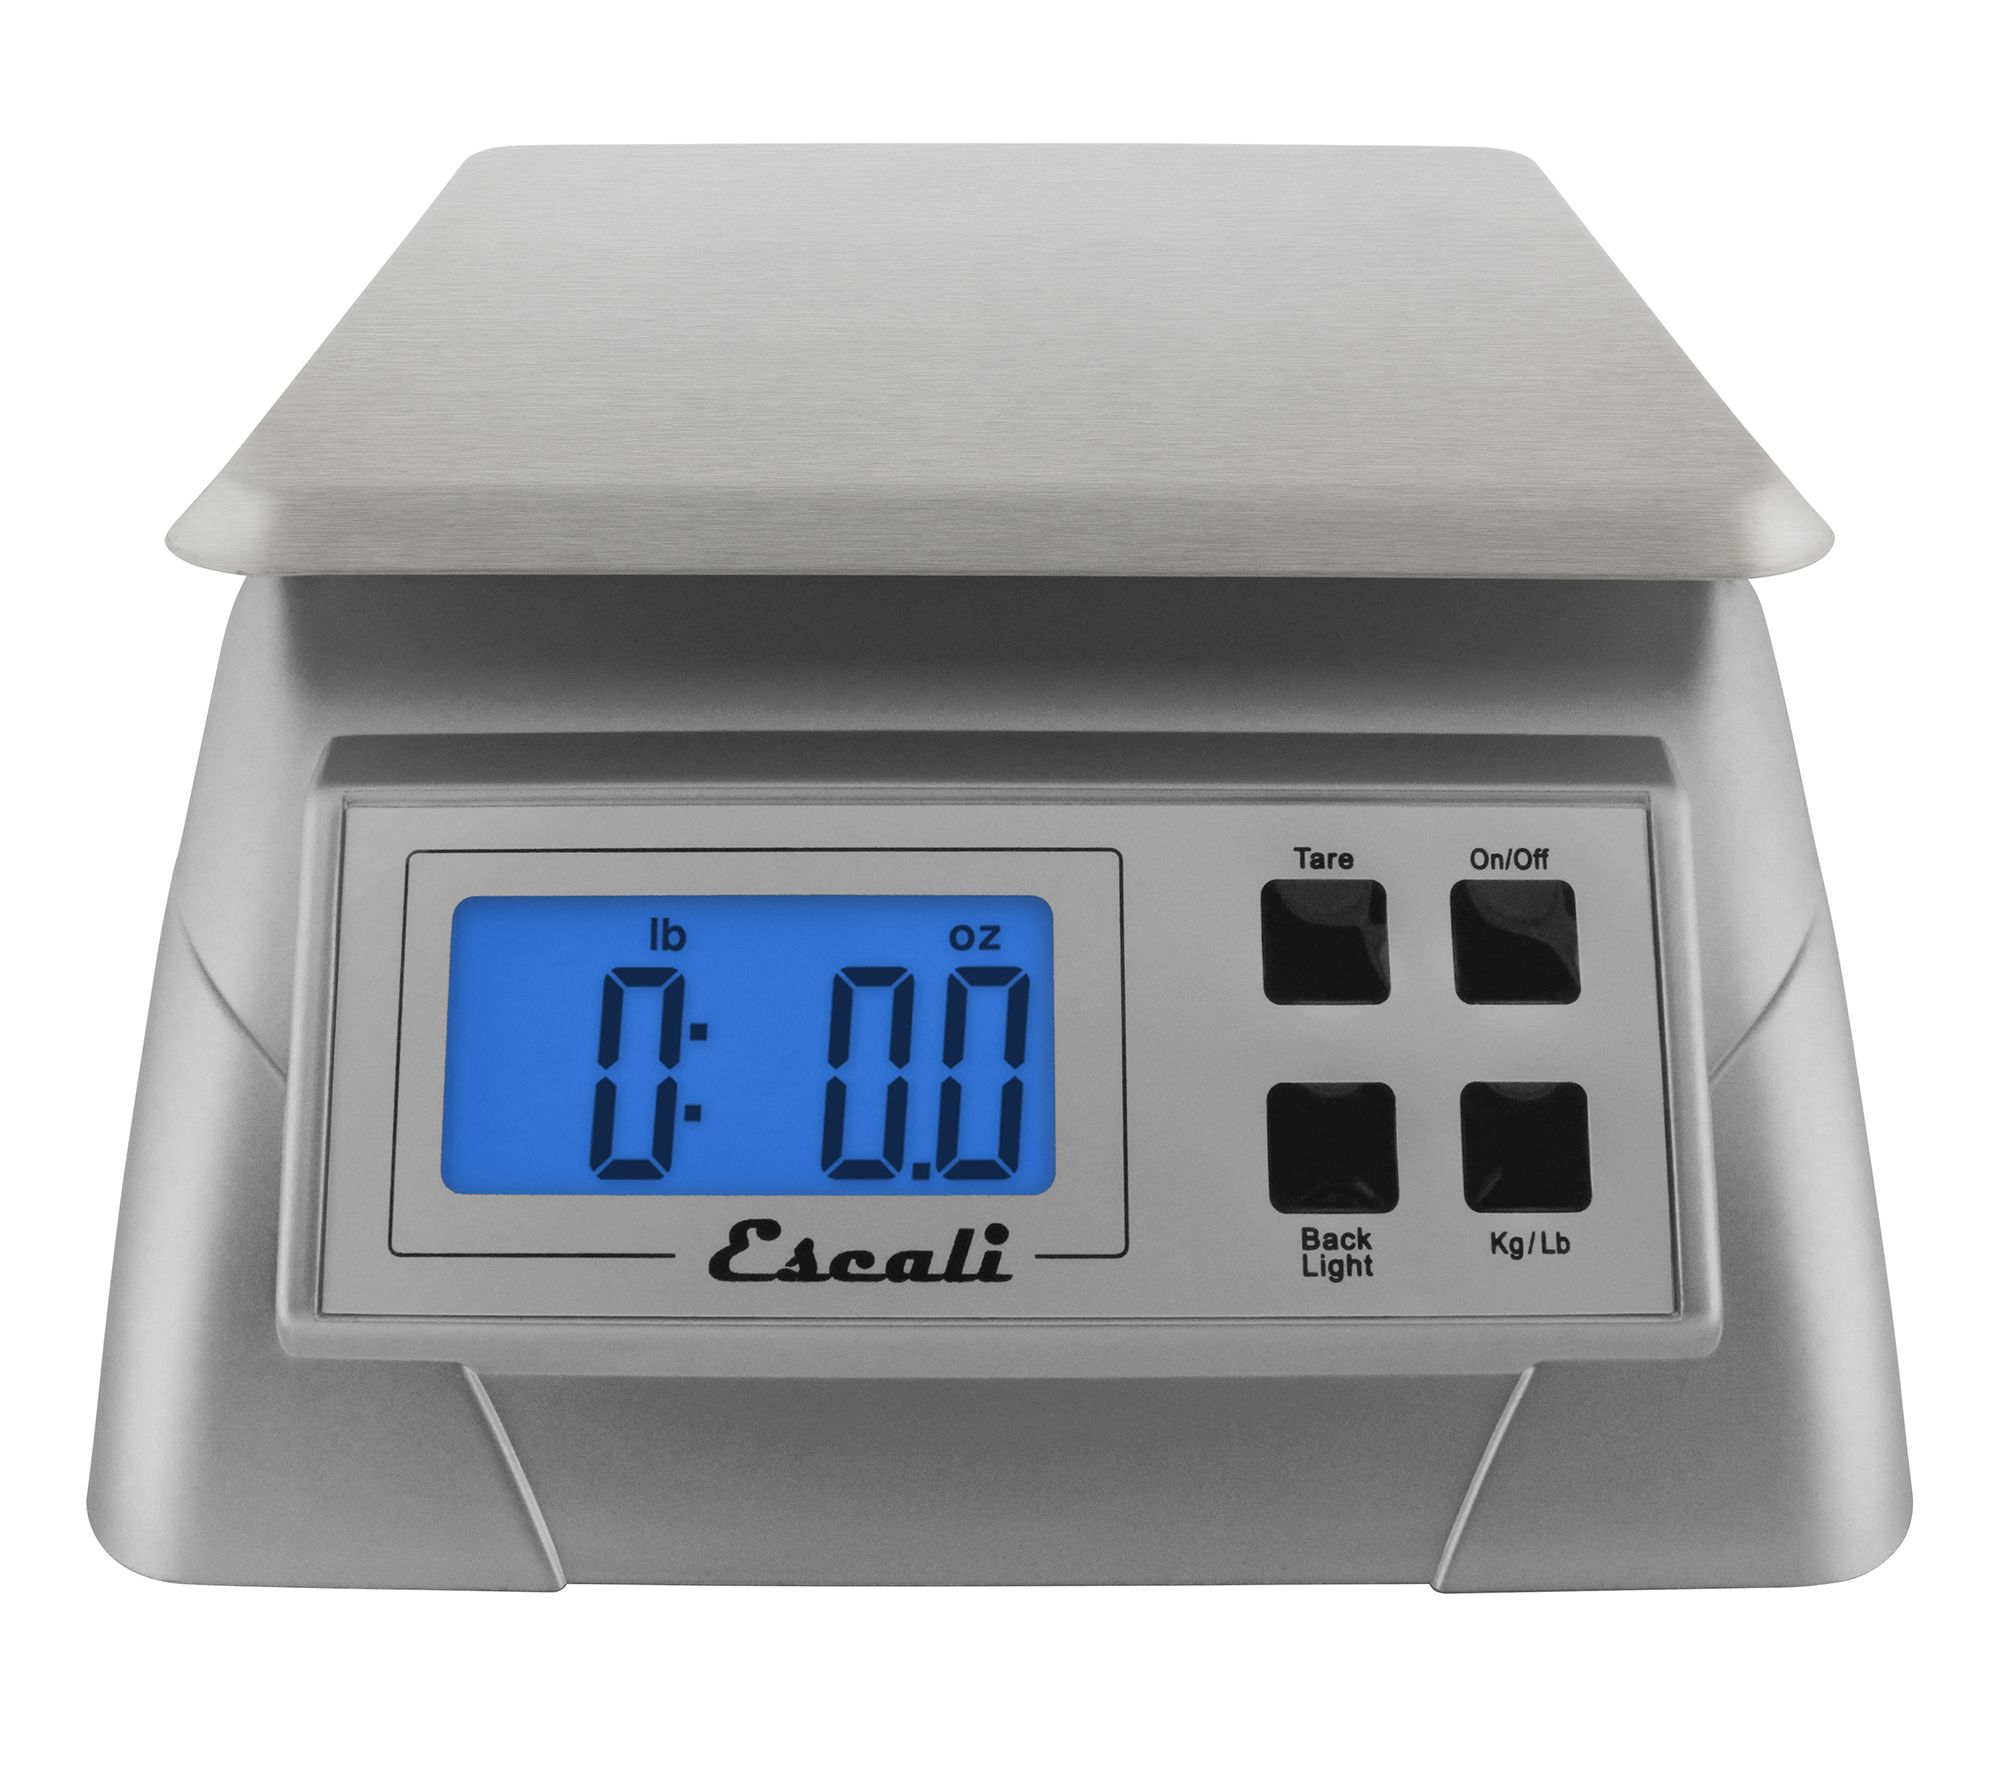 Escali Rondo Bowl Scale (Stainless Steel)